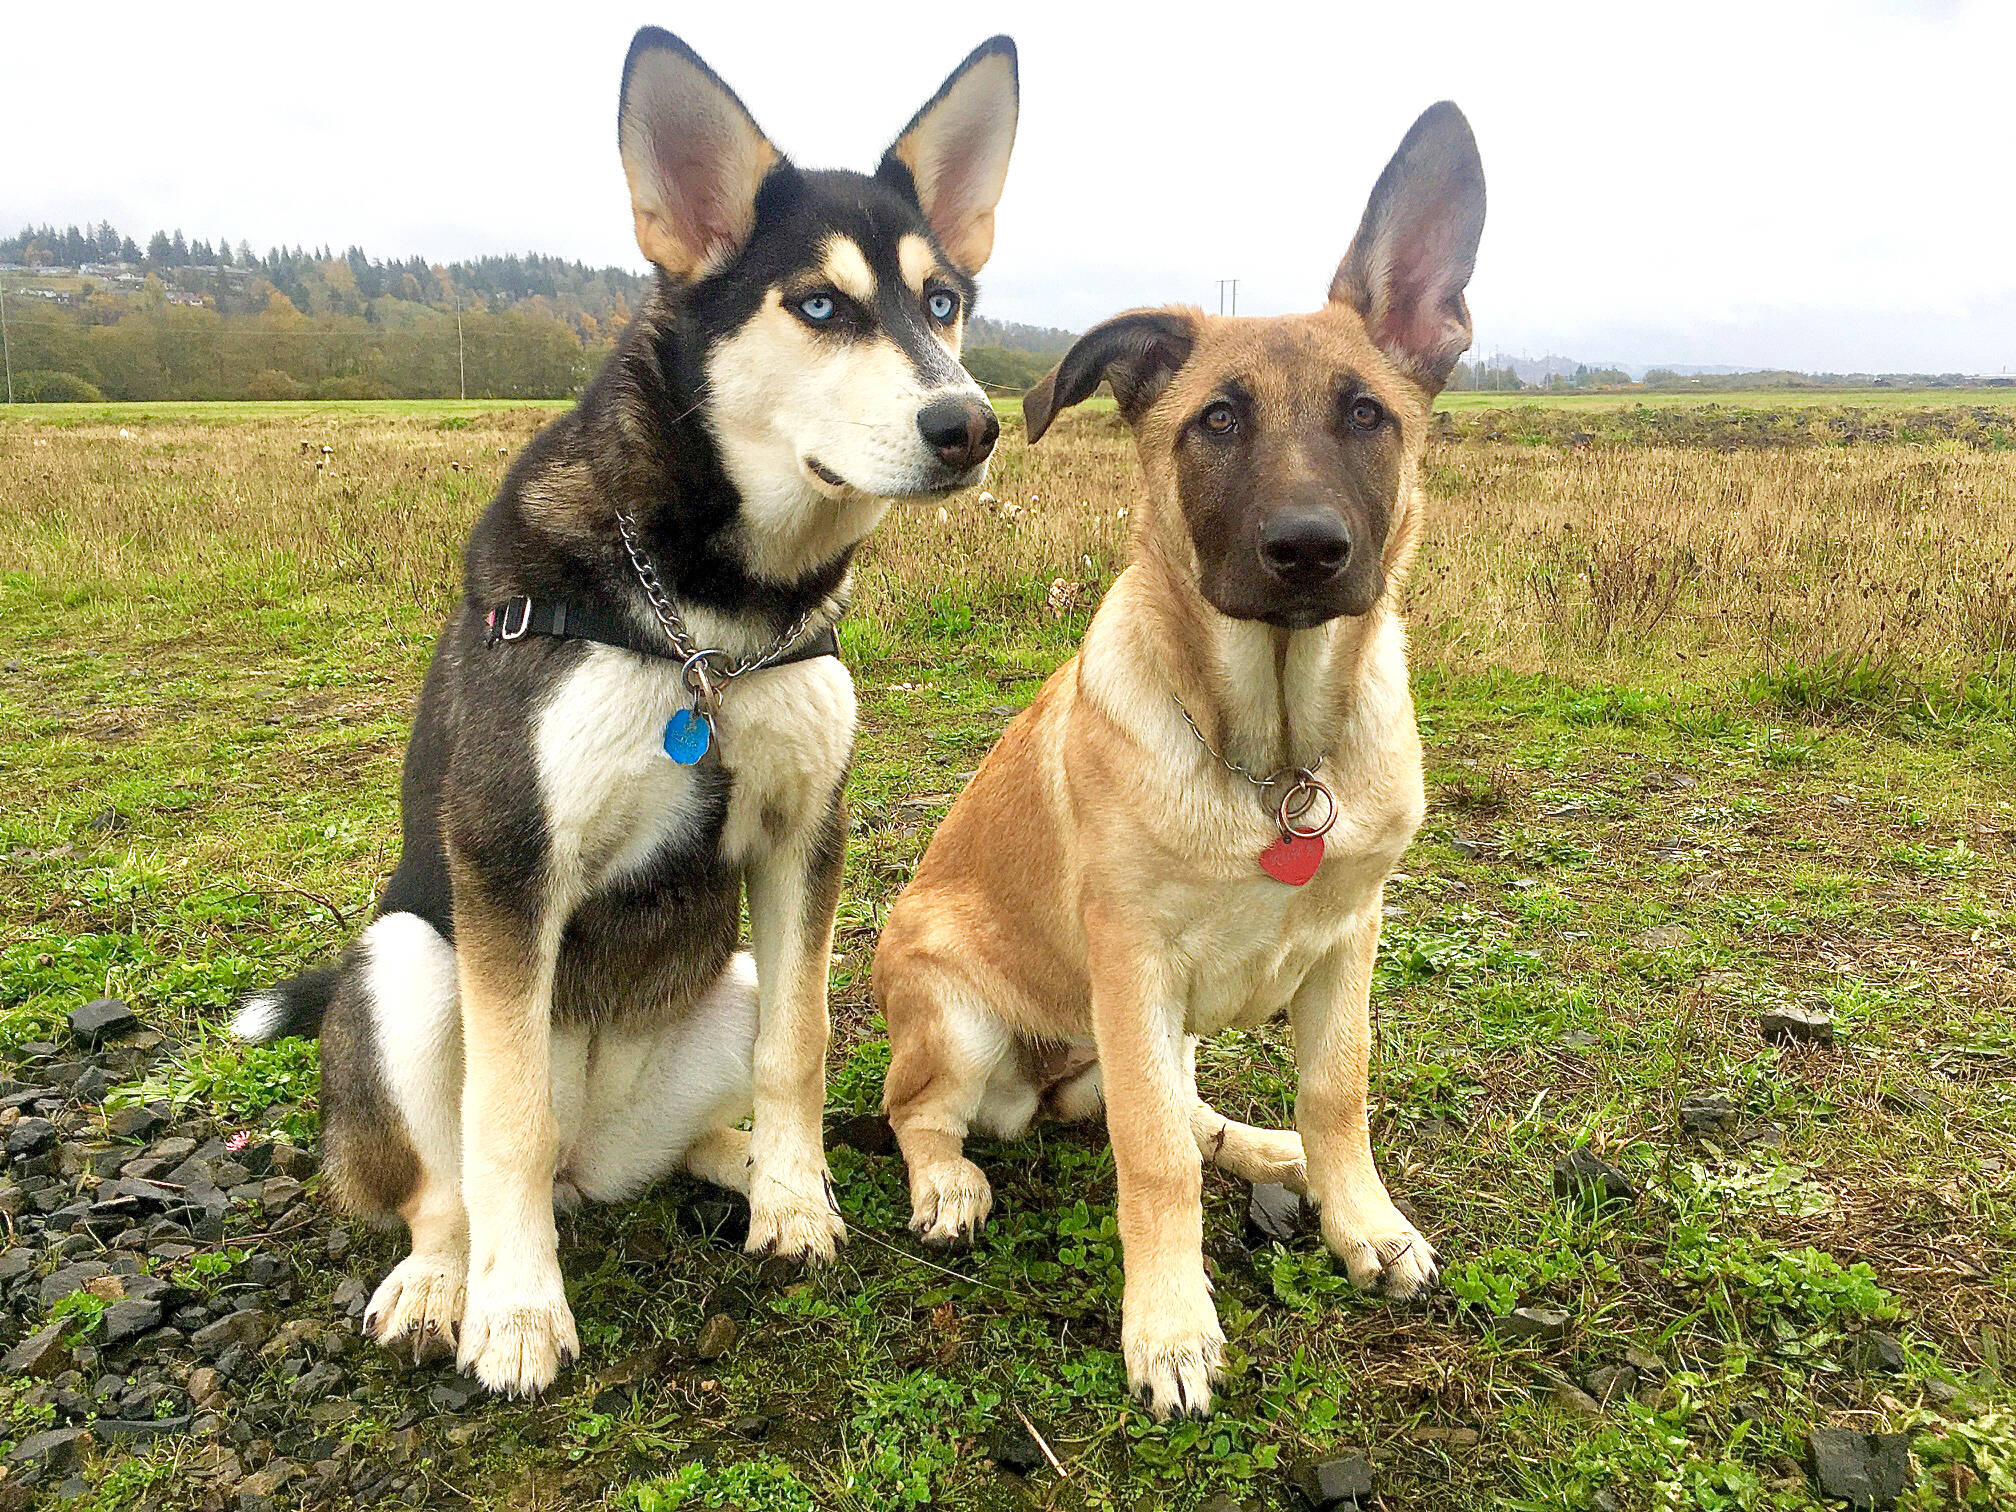 On the left, Stormy, a Husky-Malamute-shepherd mixed breed puppy, has formed a strong bond with her adopted “sister” Kona, a Belgian Malinois-German shepherd mix. Jessica Orr, who owns the two dogs with her partner Brandy Kamakawiwo’ole, and their 13-year old daughter Kamakani, adore the newest addition to their family. The family views Kona as a family member and will do what it takes to provide Kona the surgery she needs. (Jessica Orr)